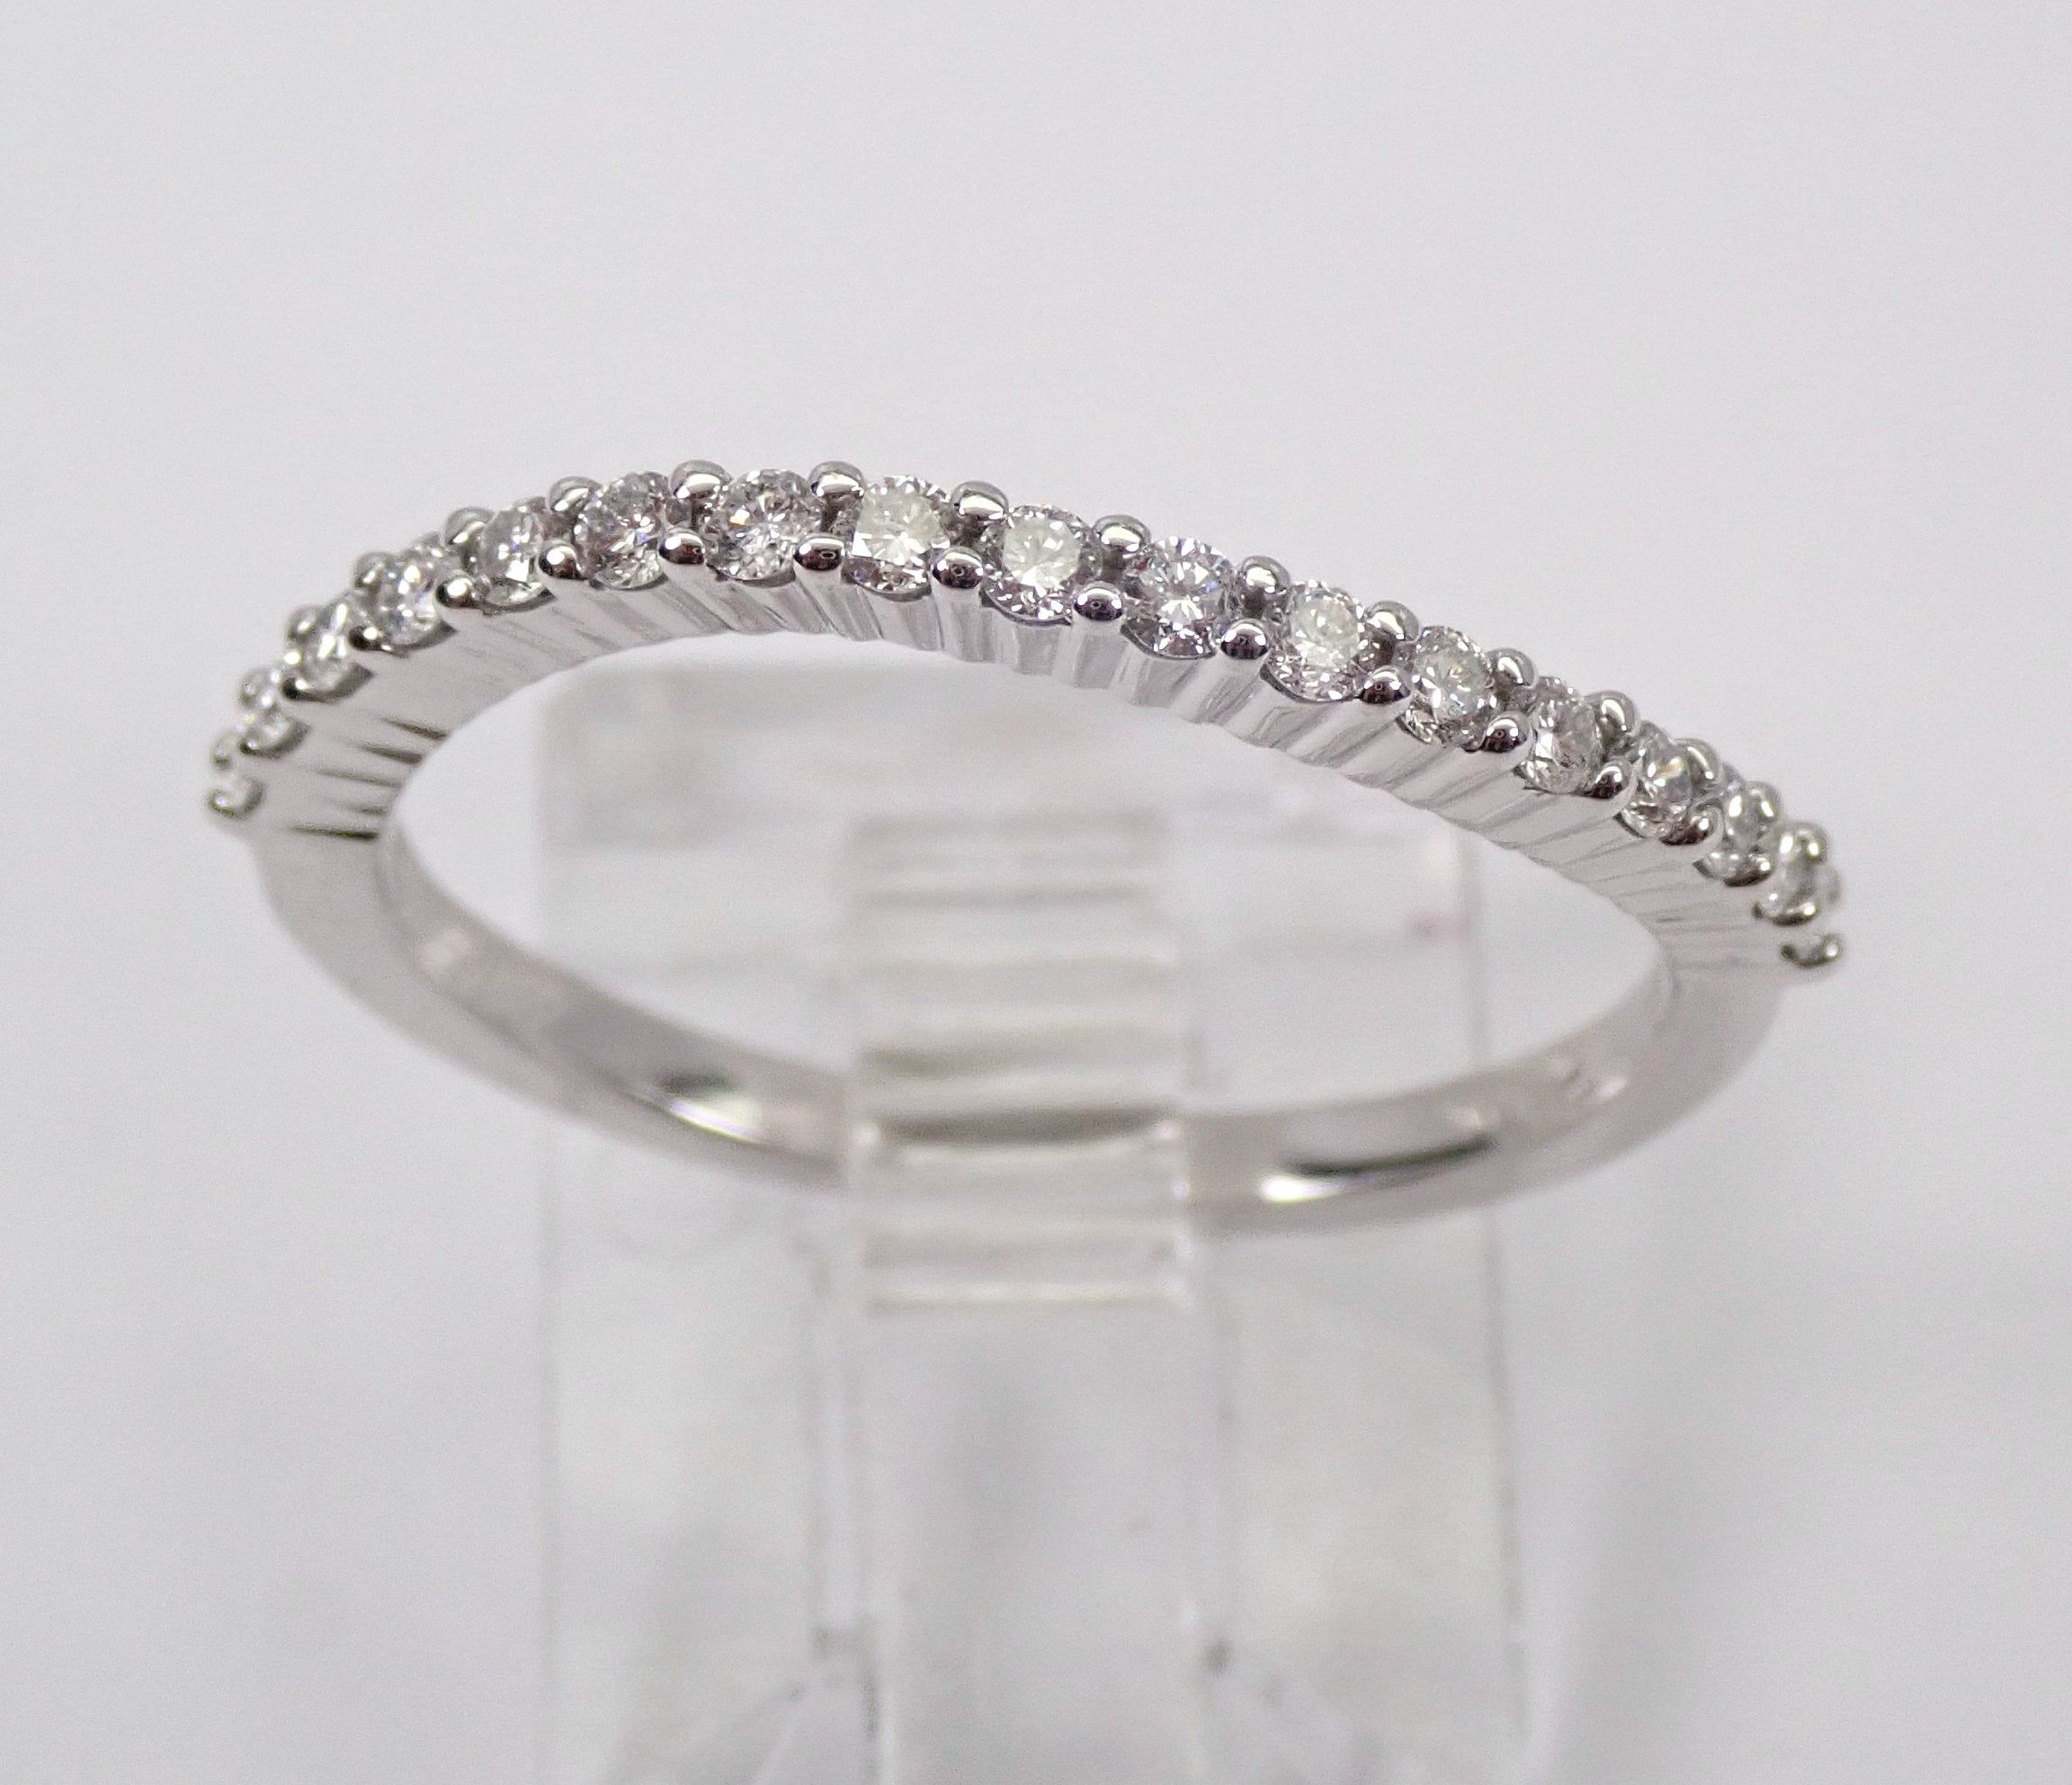 Diamond Wedding Ring Curved Contour Anniversary Band In Recent Diamond Contour Anniversary Bands In White Gold (View 6 of 25)